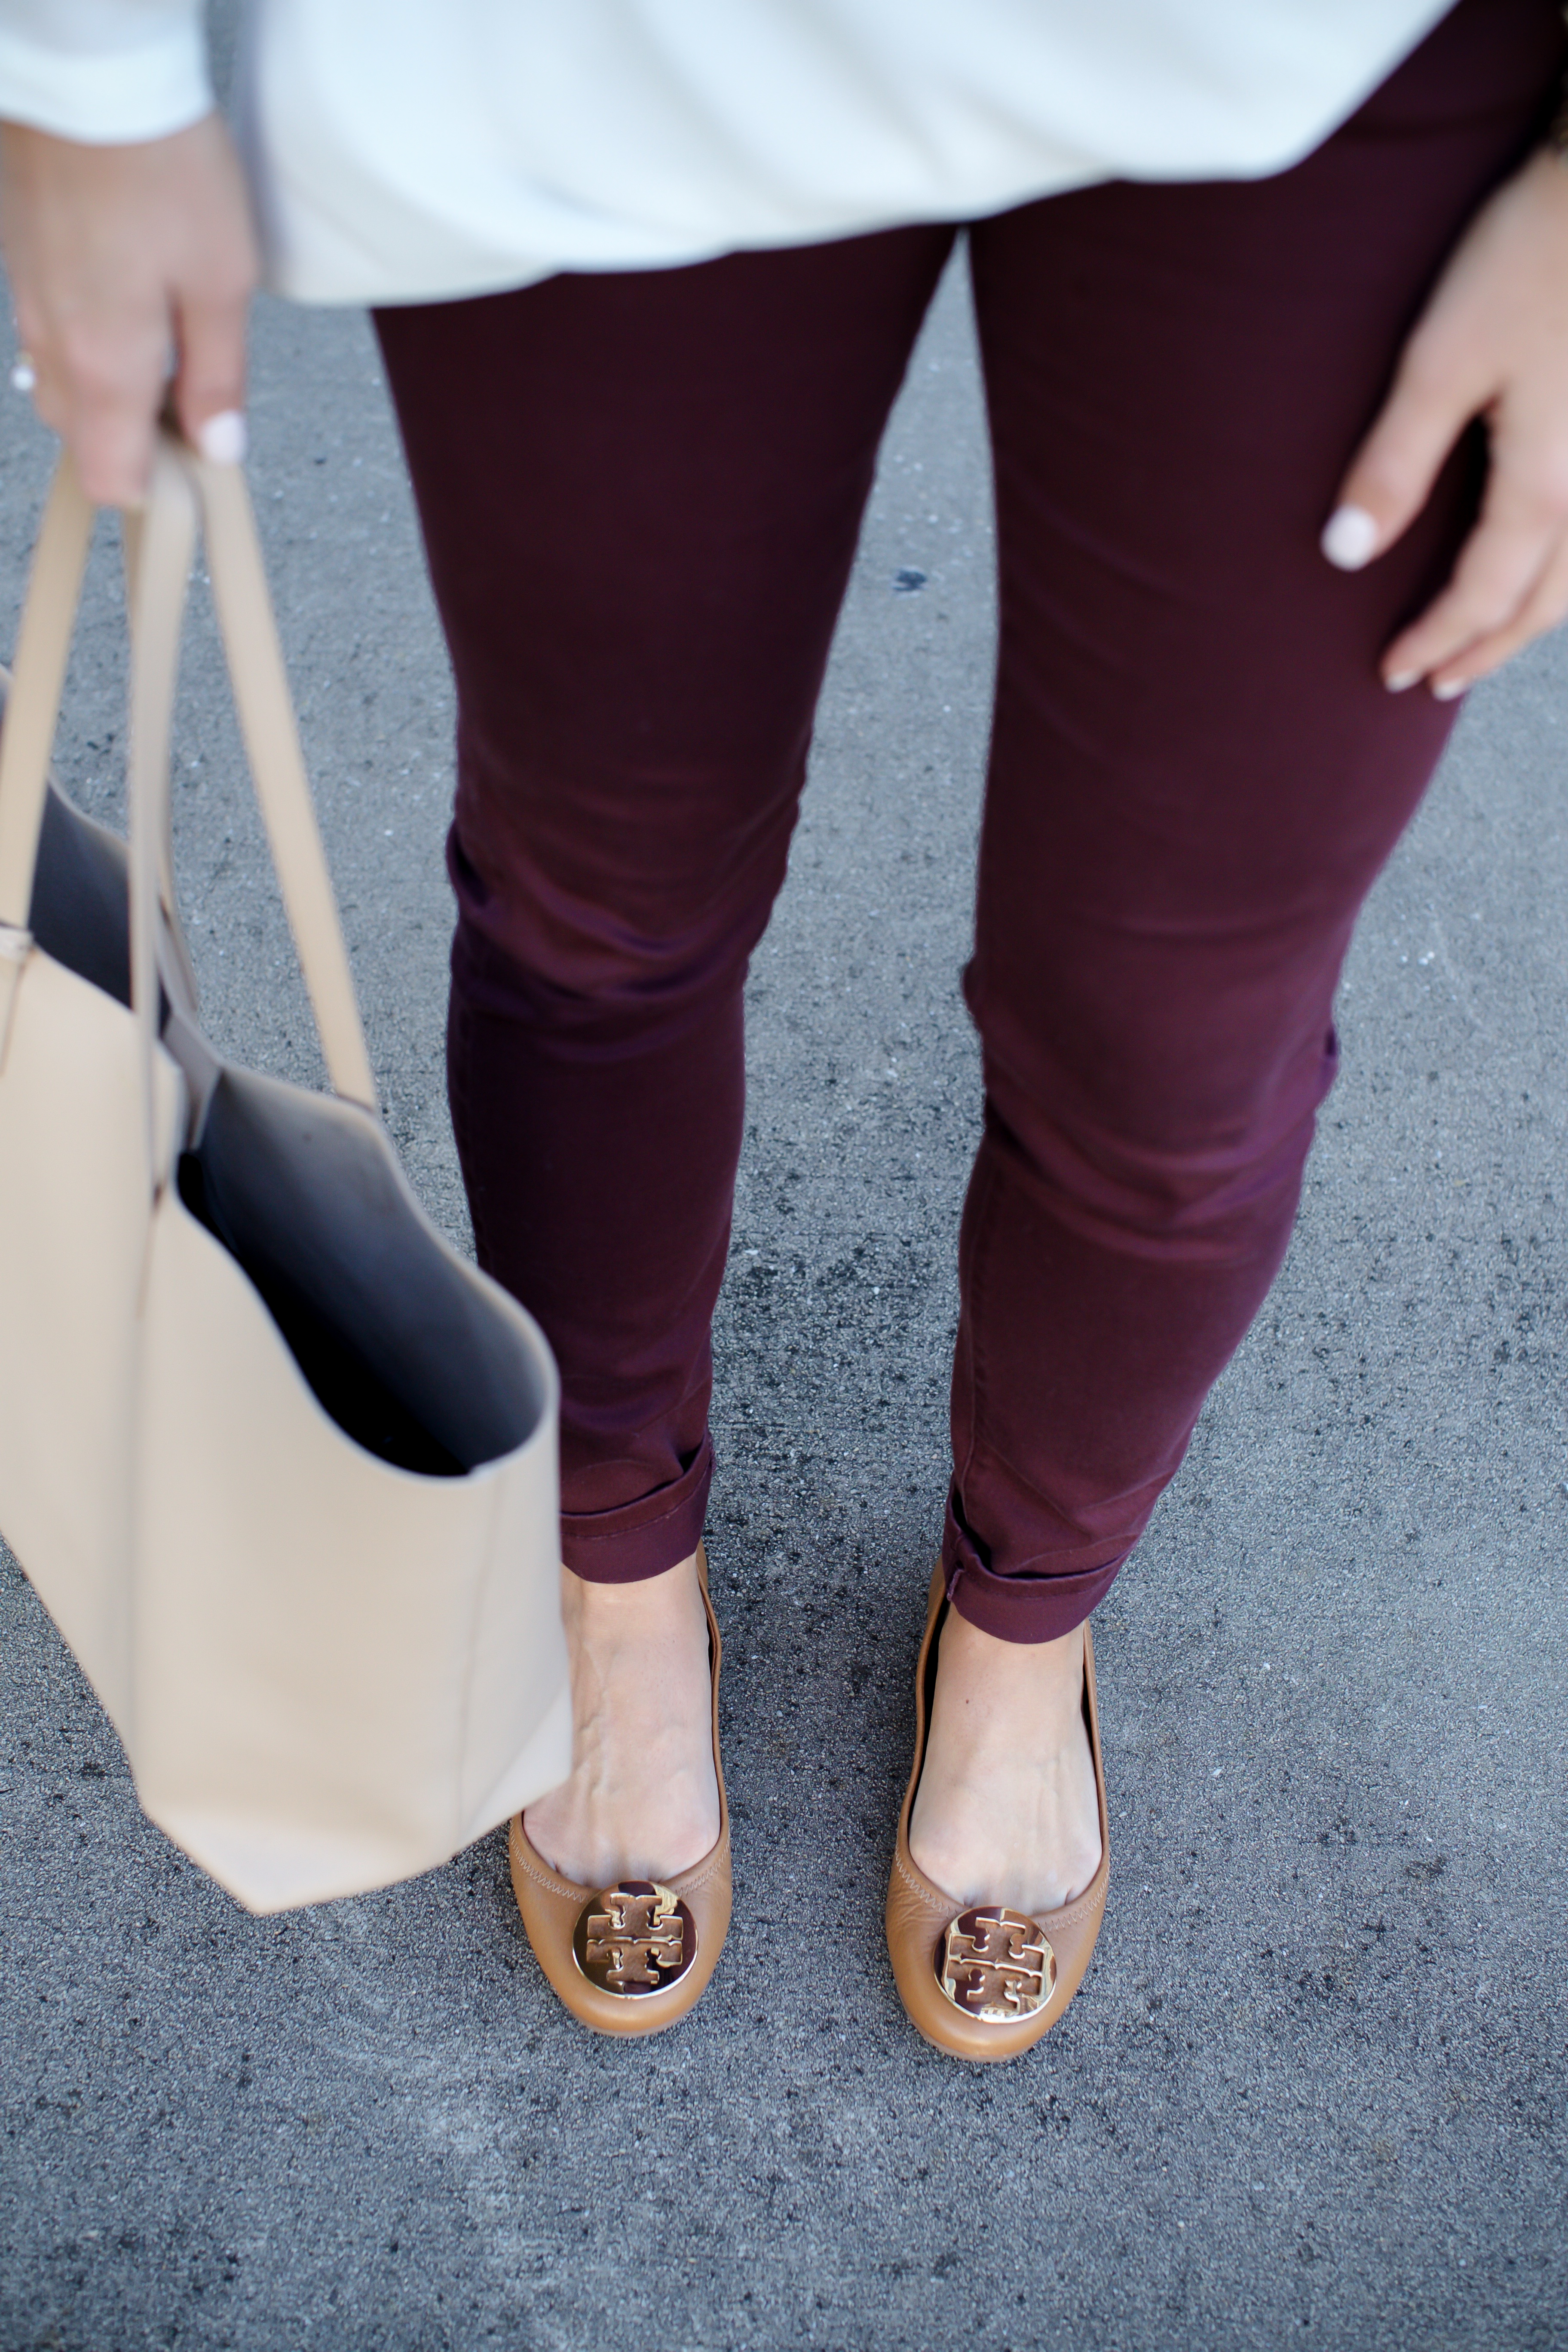 tory burch flats outfit